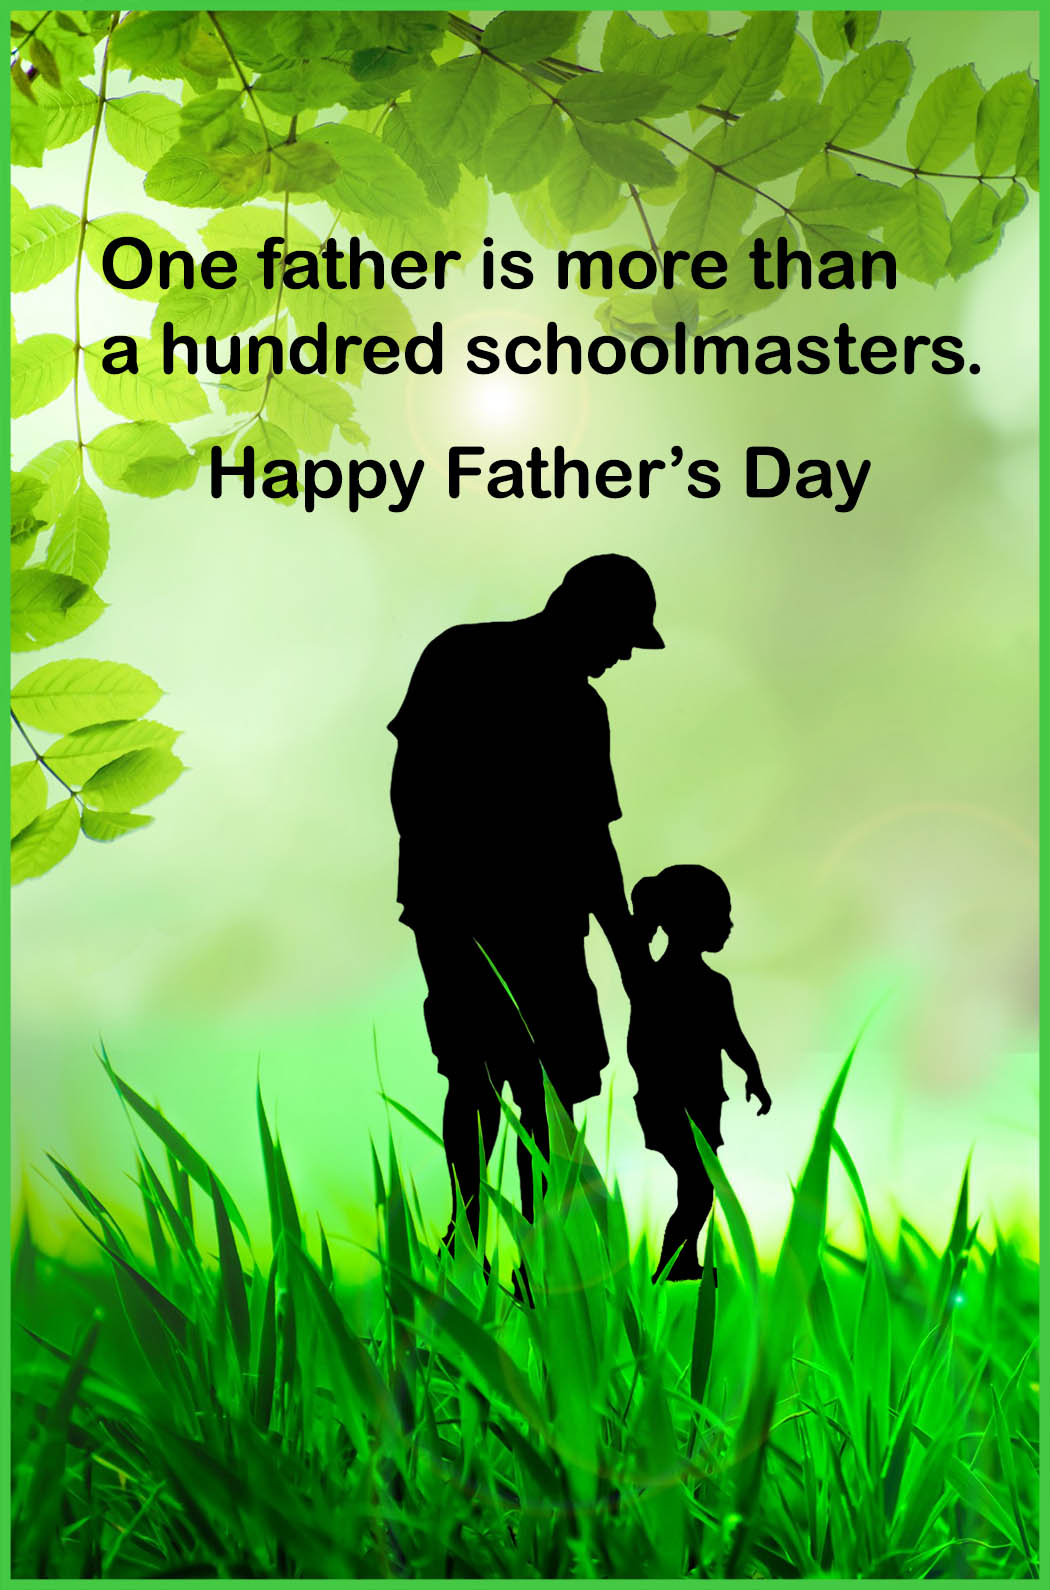 father-s-day-m-llers-bringing-christian-hope-and-wholeness-to